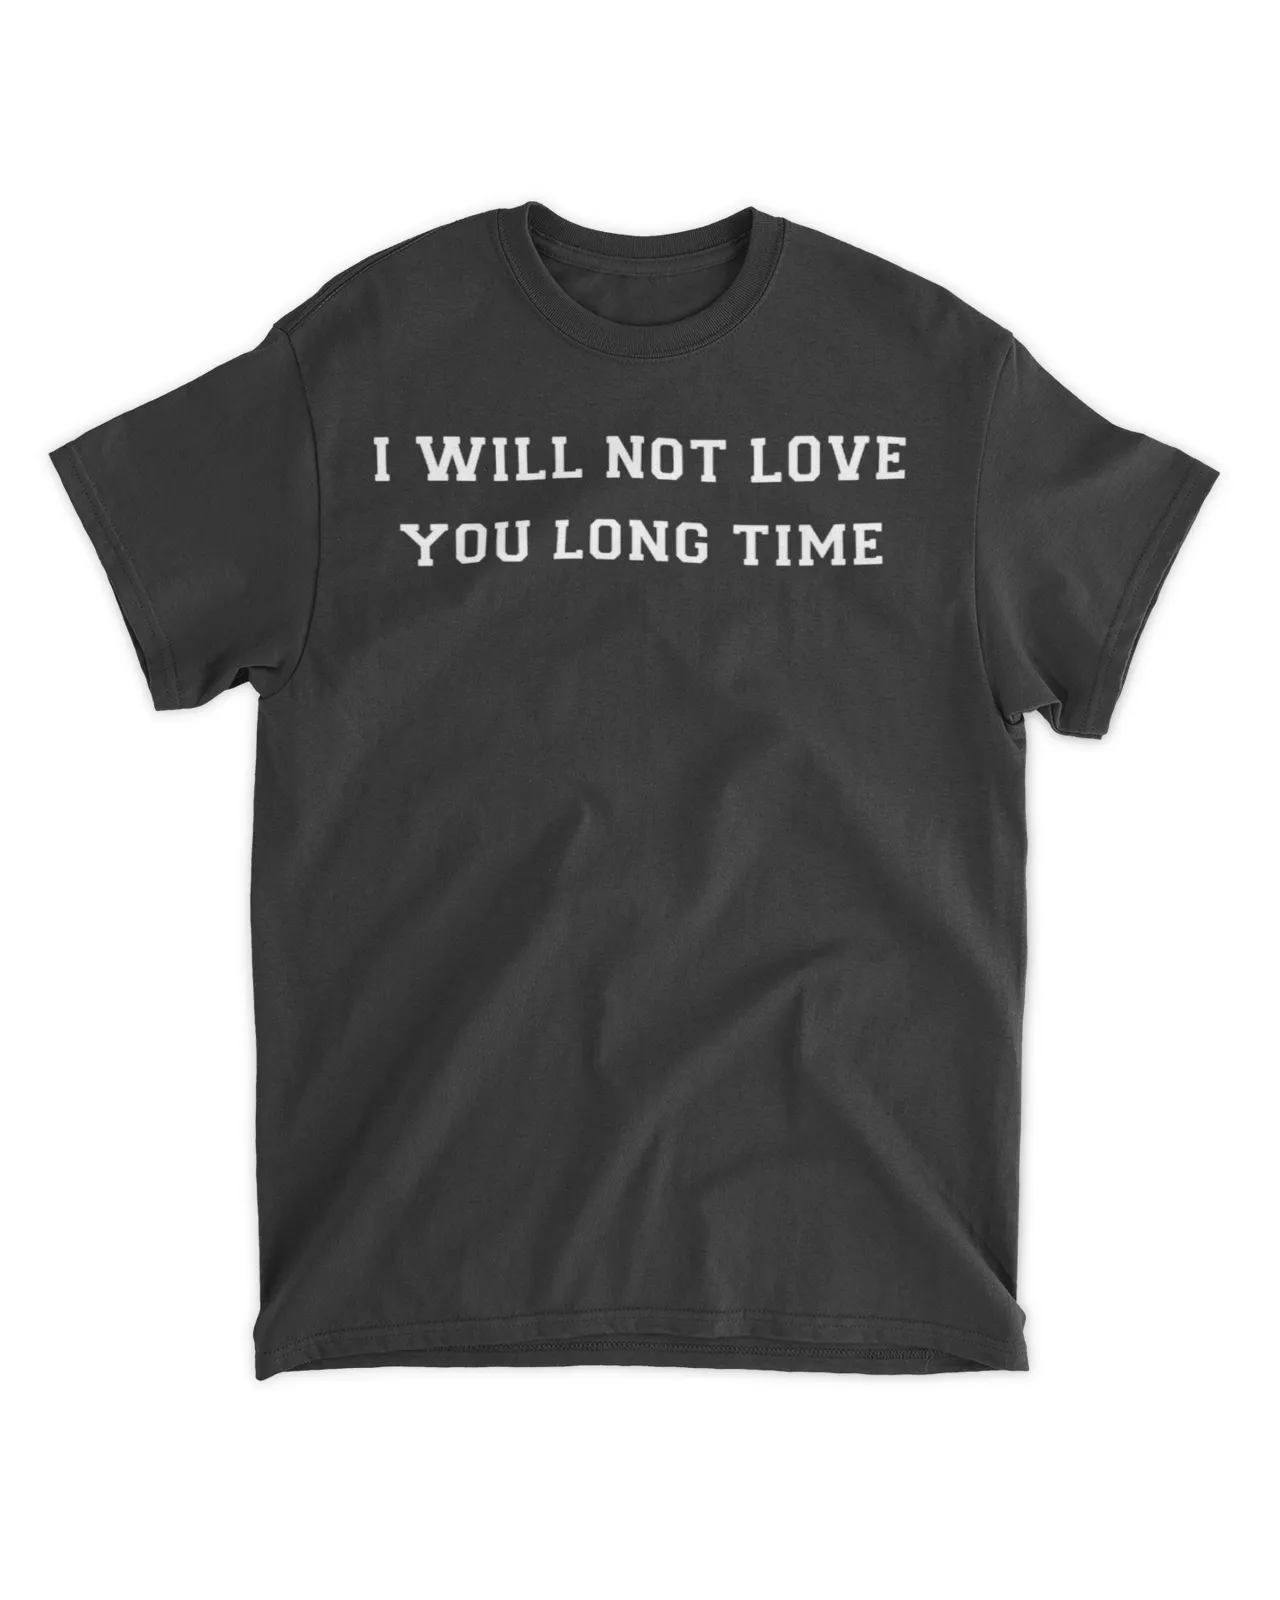  I will not love you long time shirt